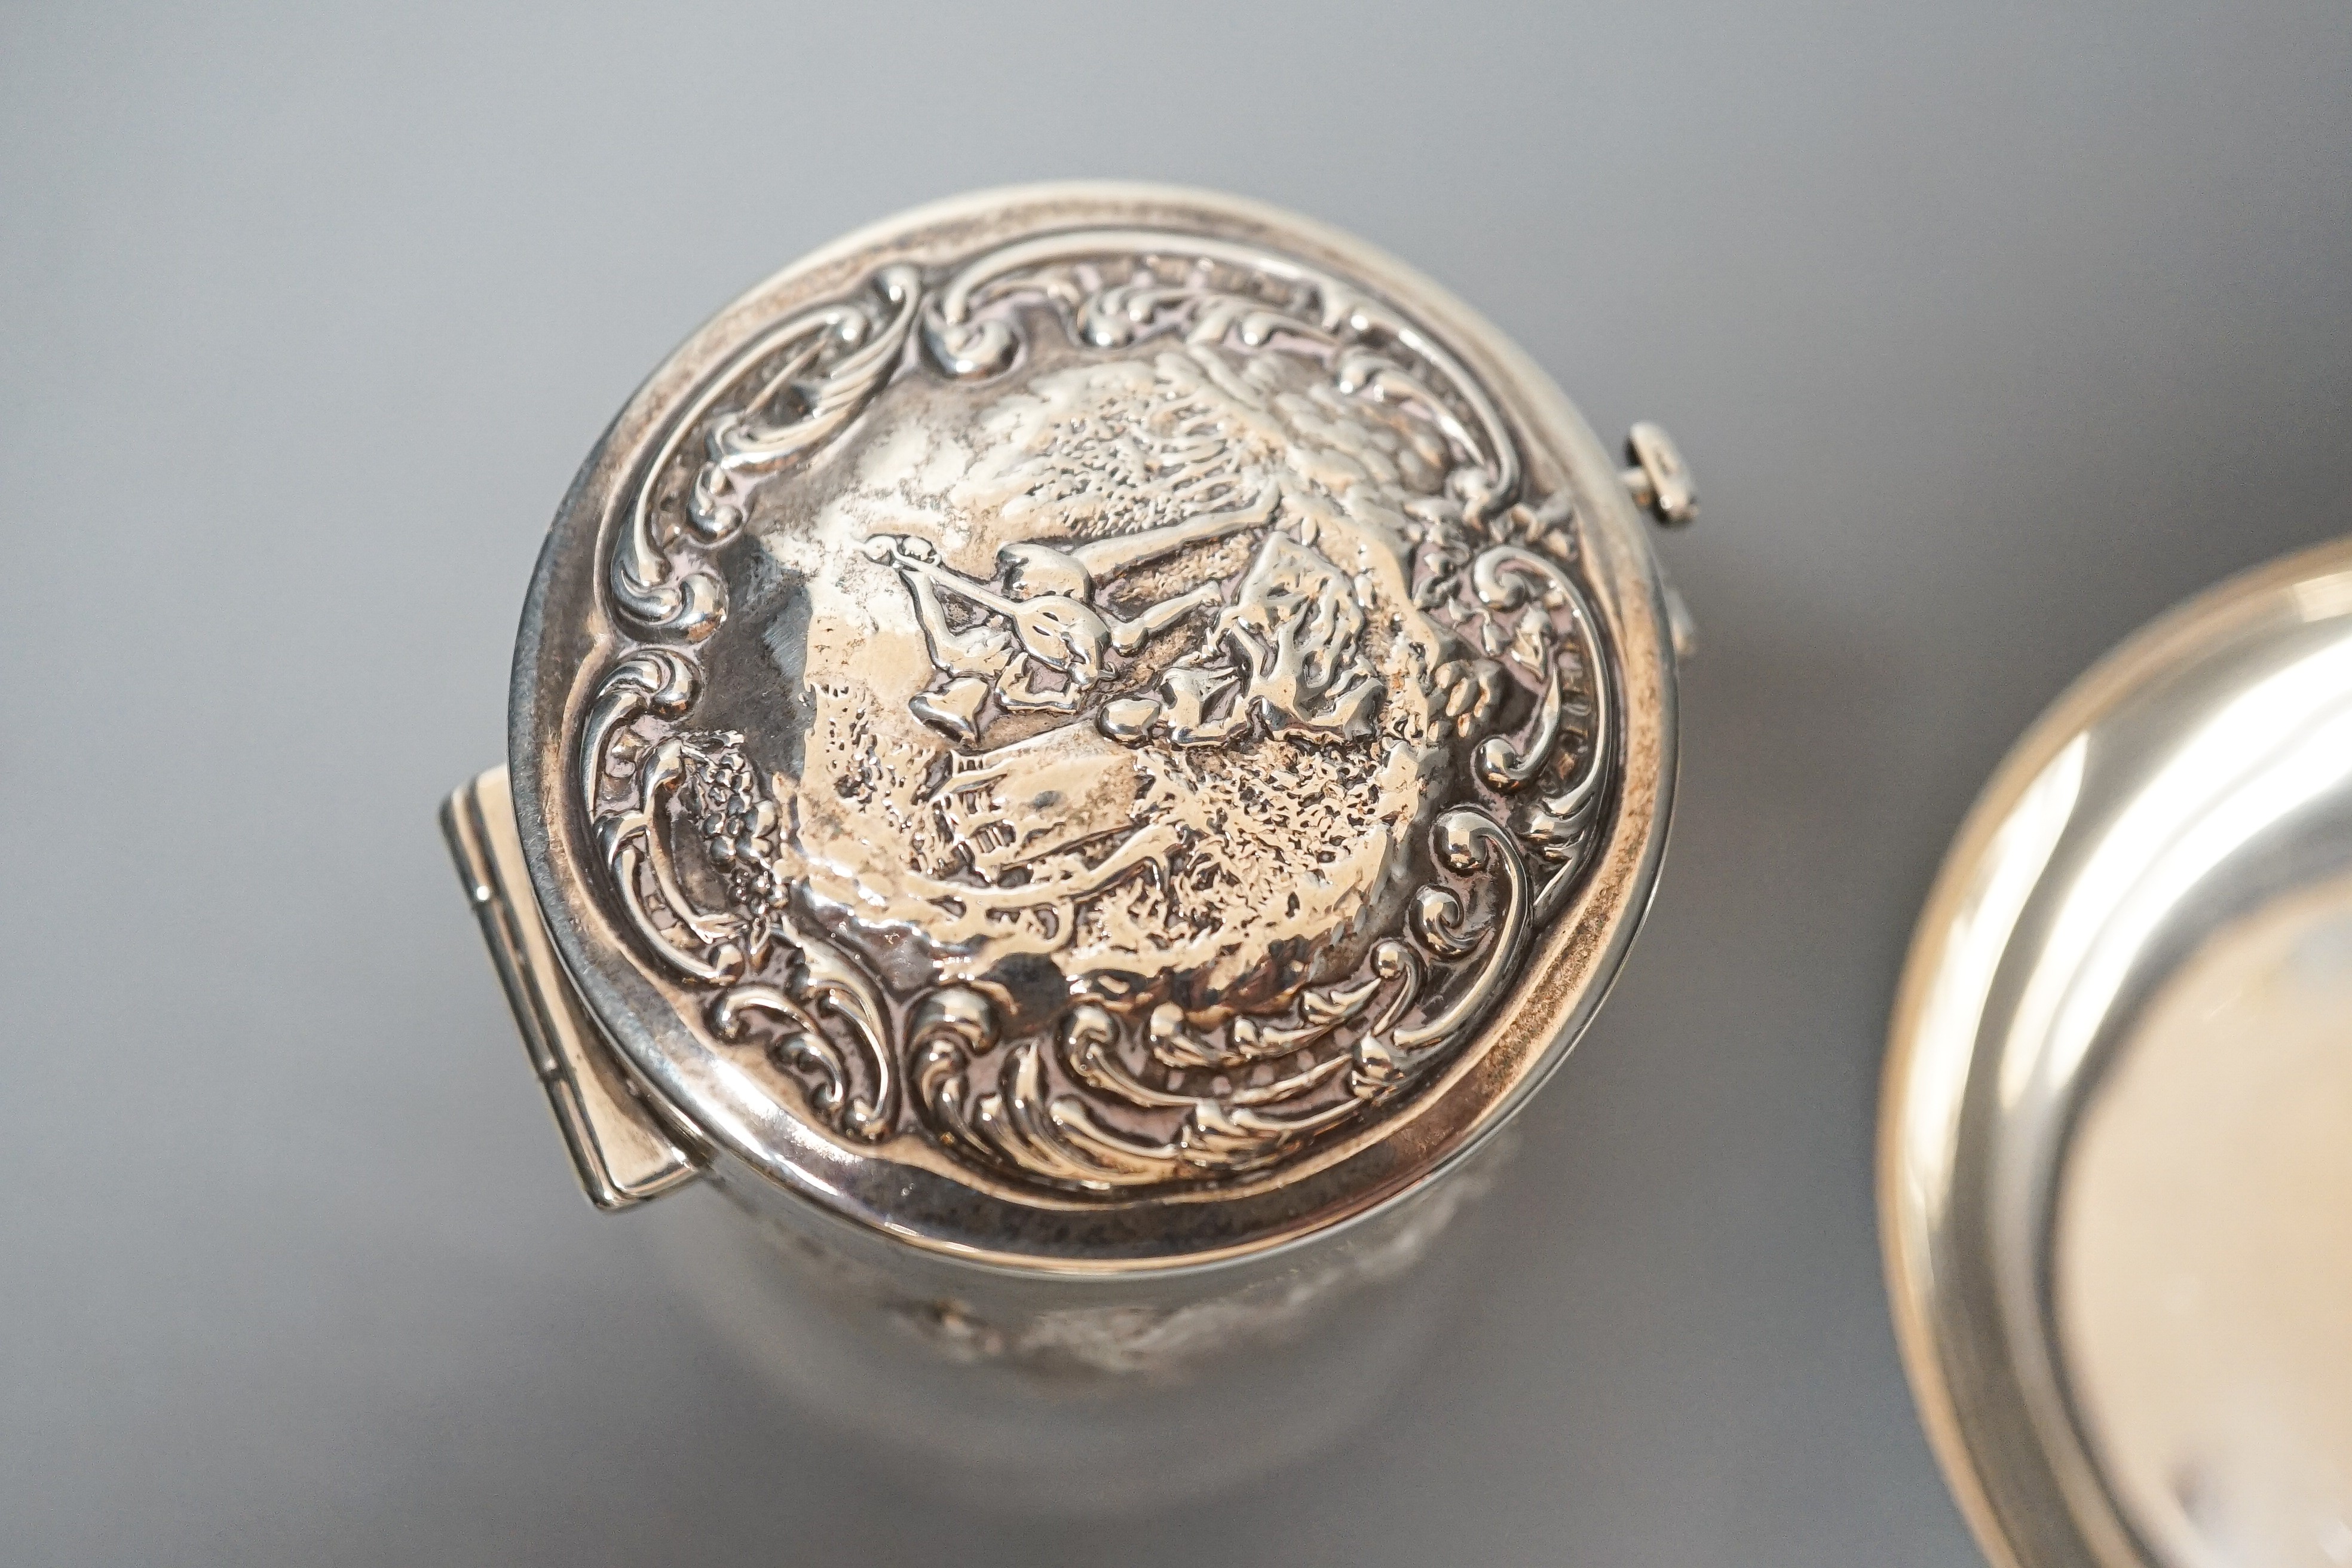 A George V silver taste vin, Tessiers Ltd, London, 1924, 10.2cm, together with an Edwardian embossed silver travelling hair curling tongs warmer, Levy & Salaman, Birmingham, 1901, 52mm (lacking warmer?).